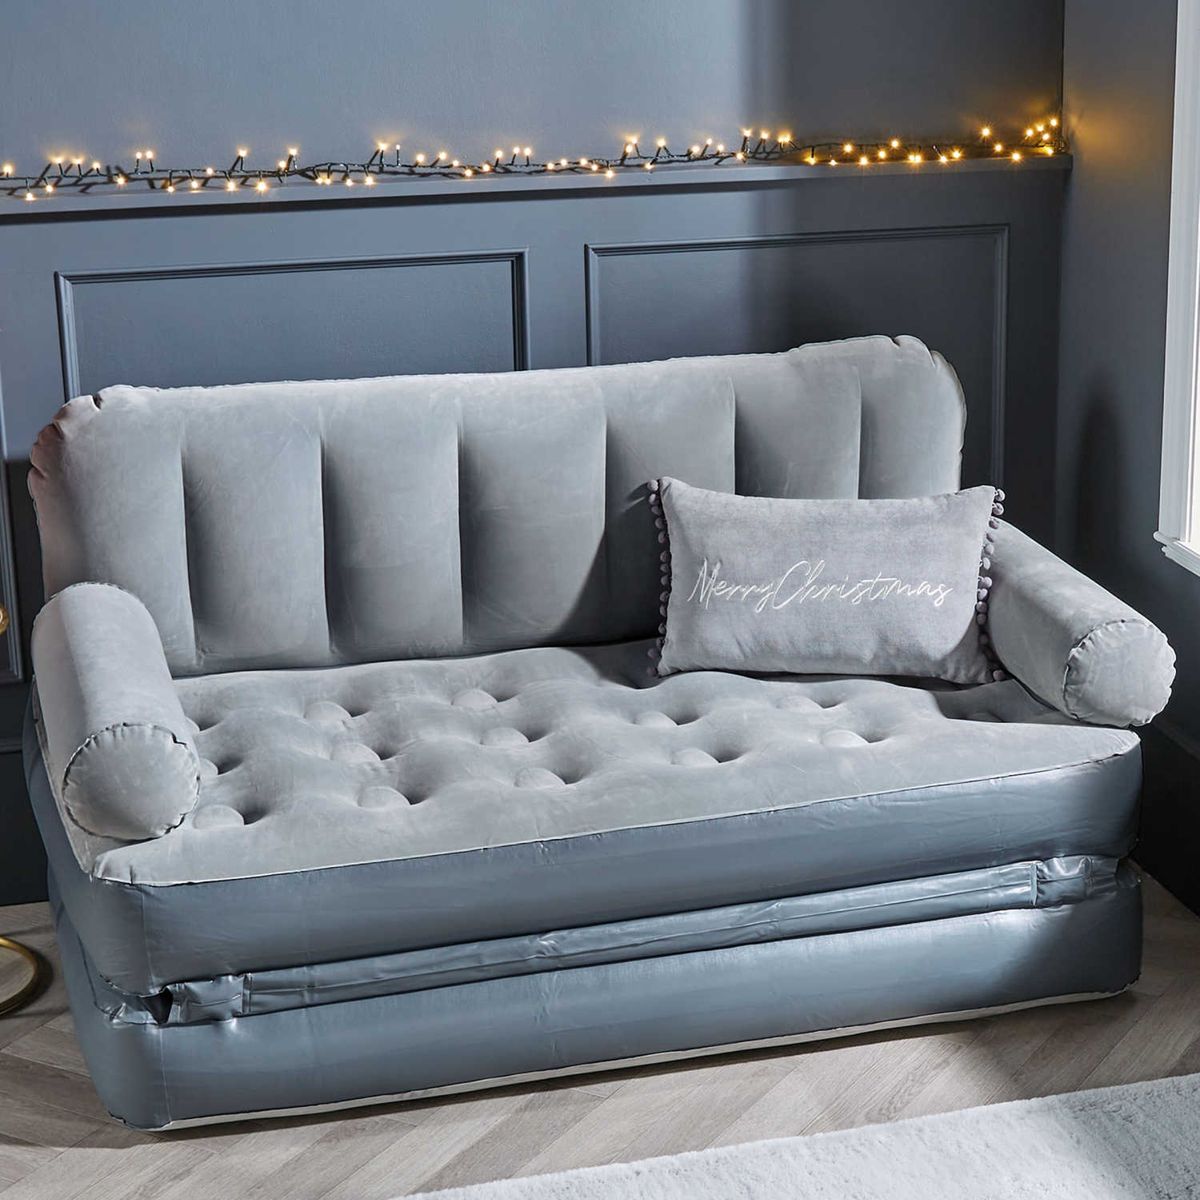 Aldi is selling an inflatable sofa bed for £39.99 – it's perfect for last minute guests